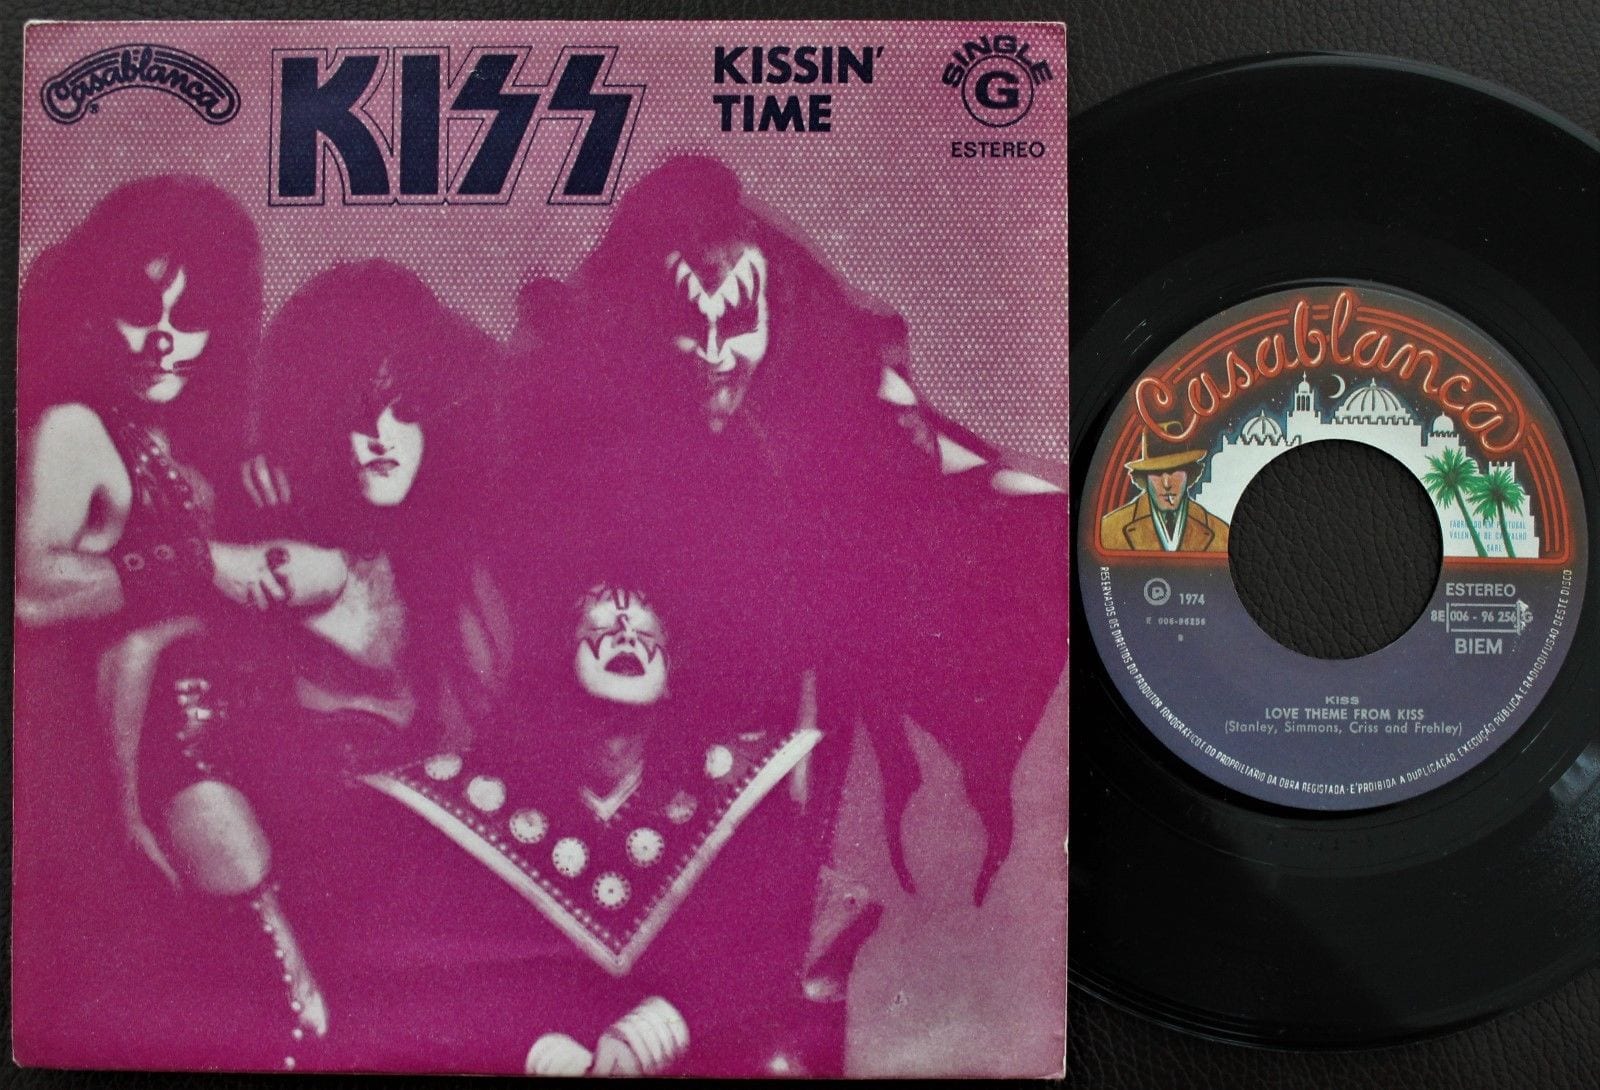 Kiss returned to Bell Sound Studios to record "Kissin' Time"